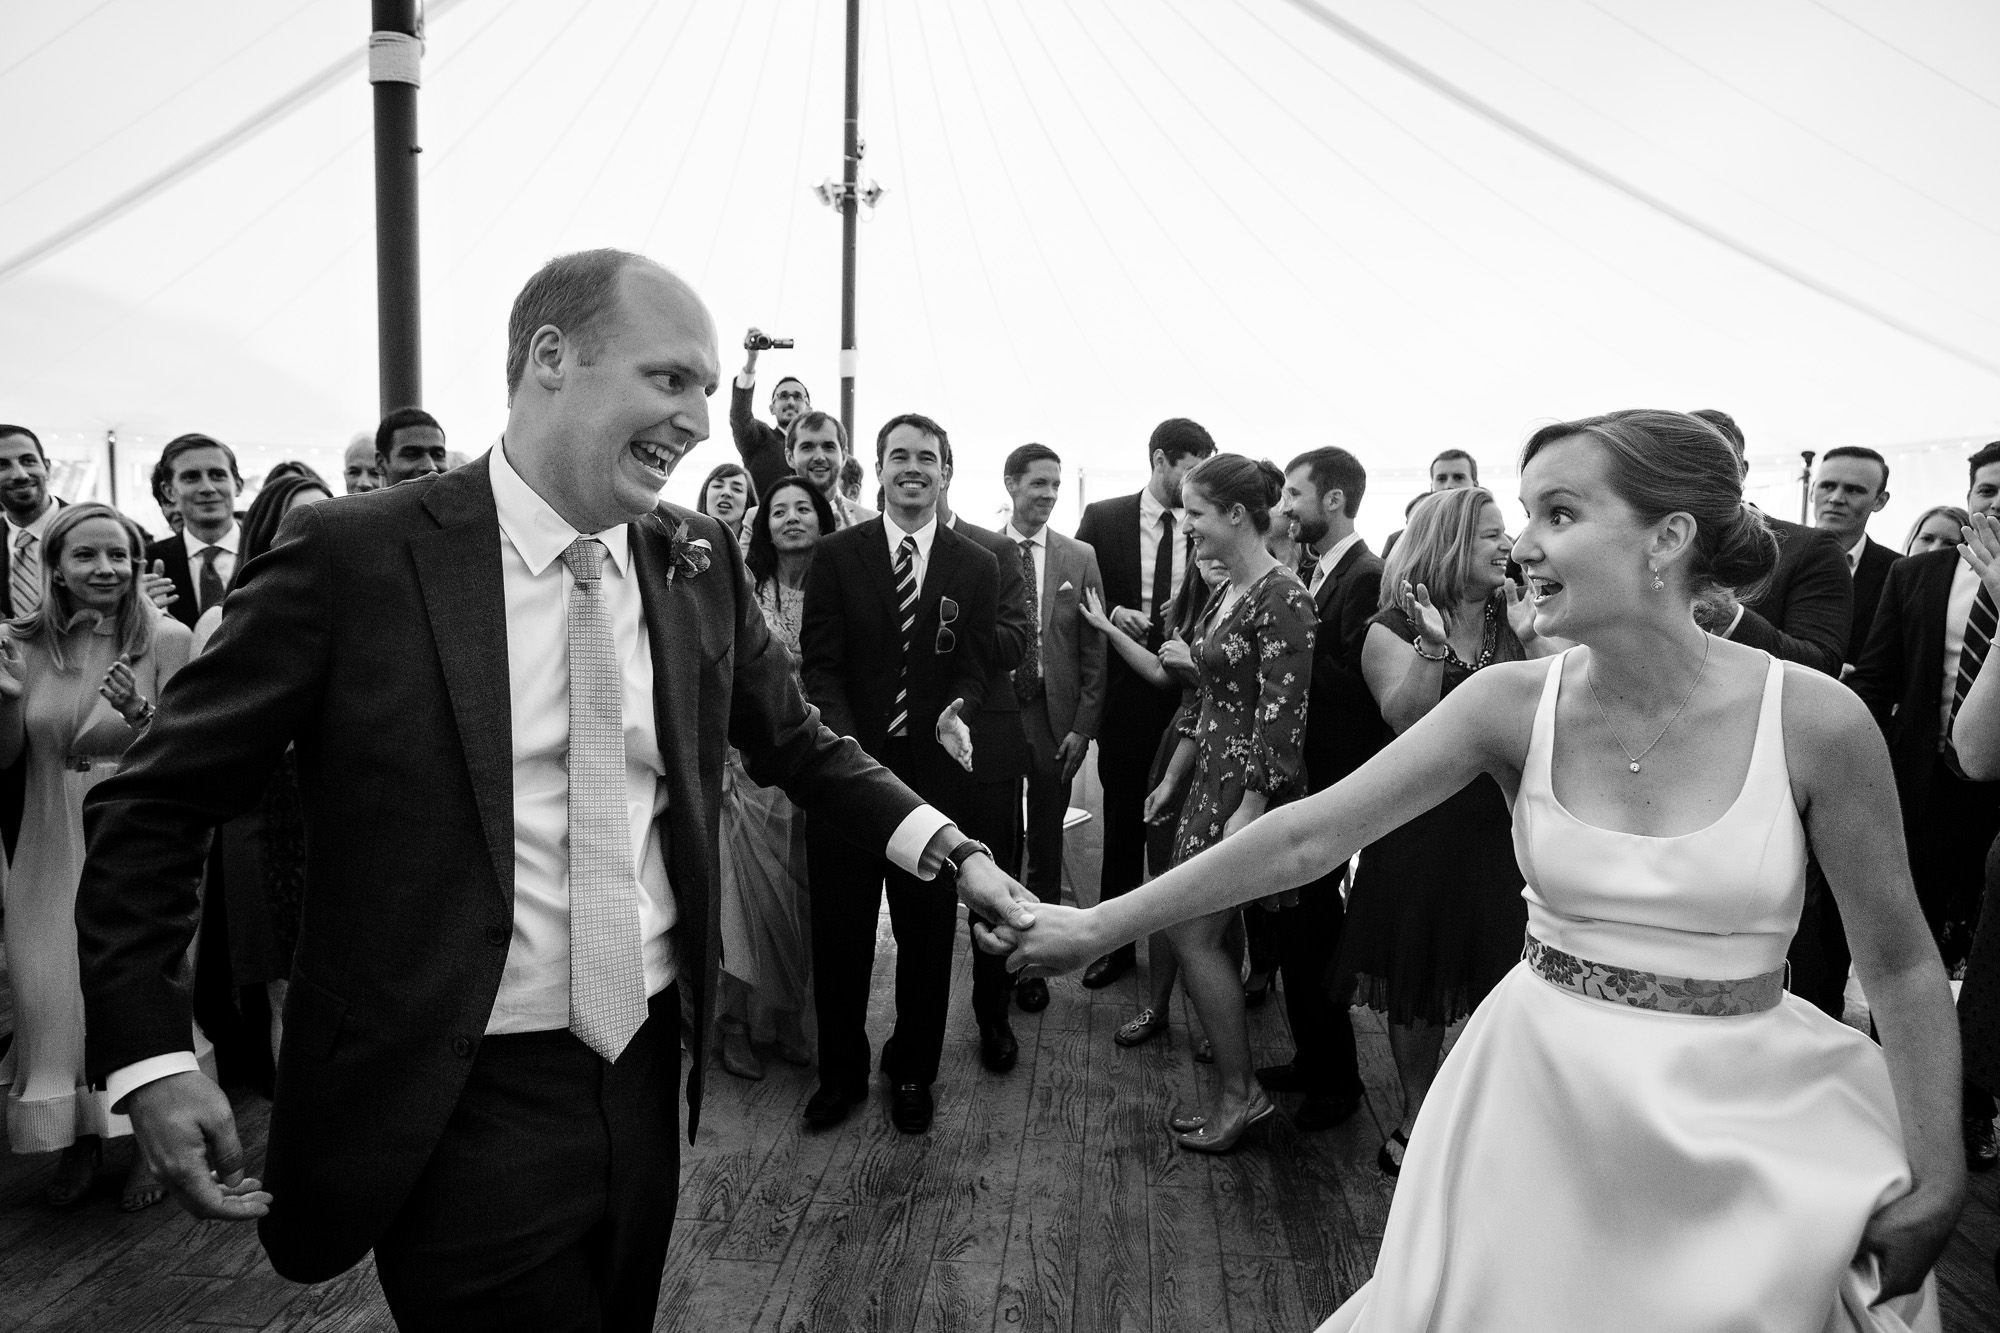 The bride and groom share a dance with their guests at their French's Point wedding